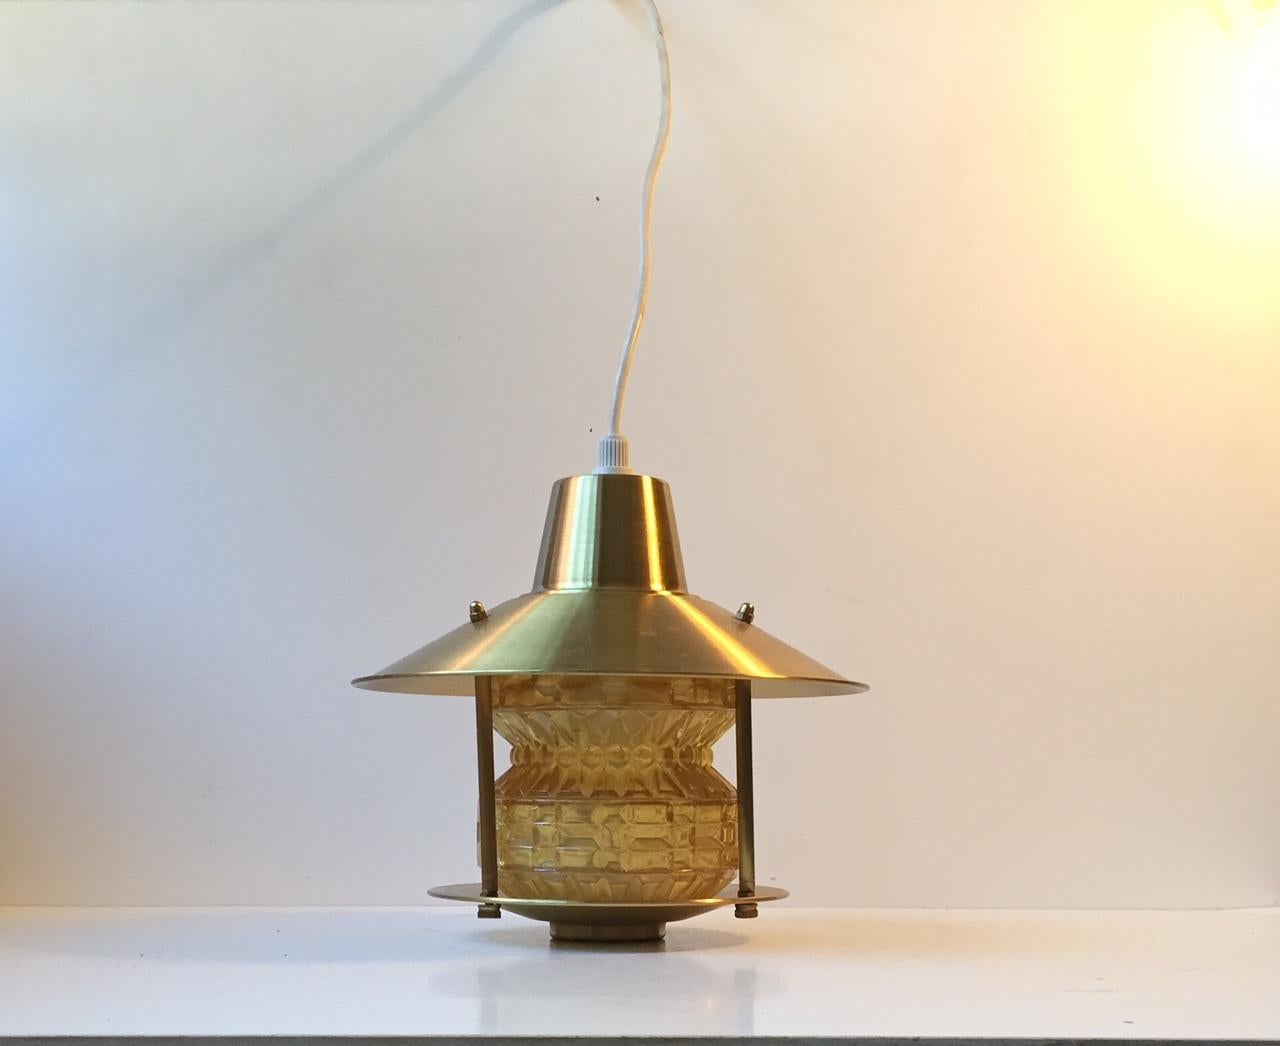 Entrance, corridor or Hallway pendant lamp composed of brushed brass and yellow glass with geometric patterns. It was manufactured by Lyfa in Denmark during the late 1950s. The style of this lamp is reminiscent of Hans-Agne Jakobsson.